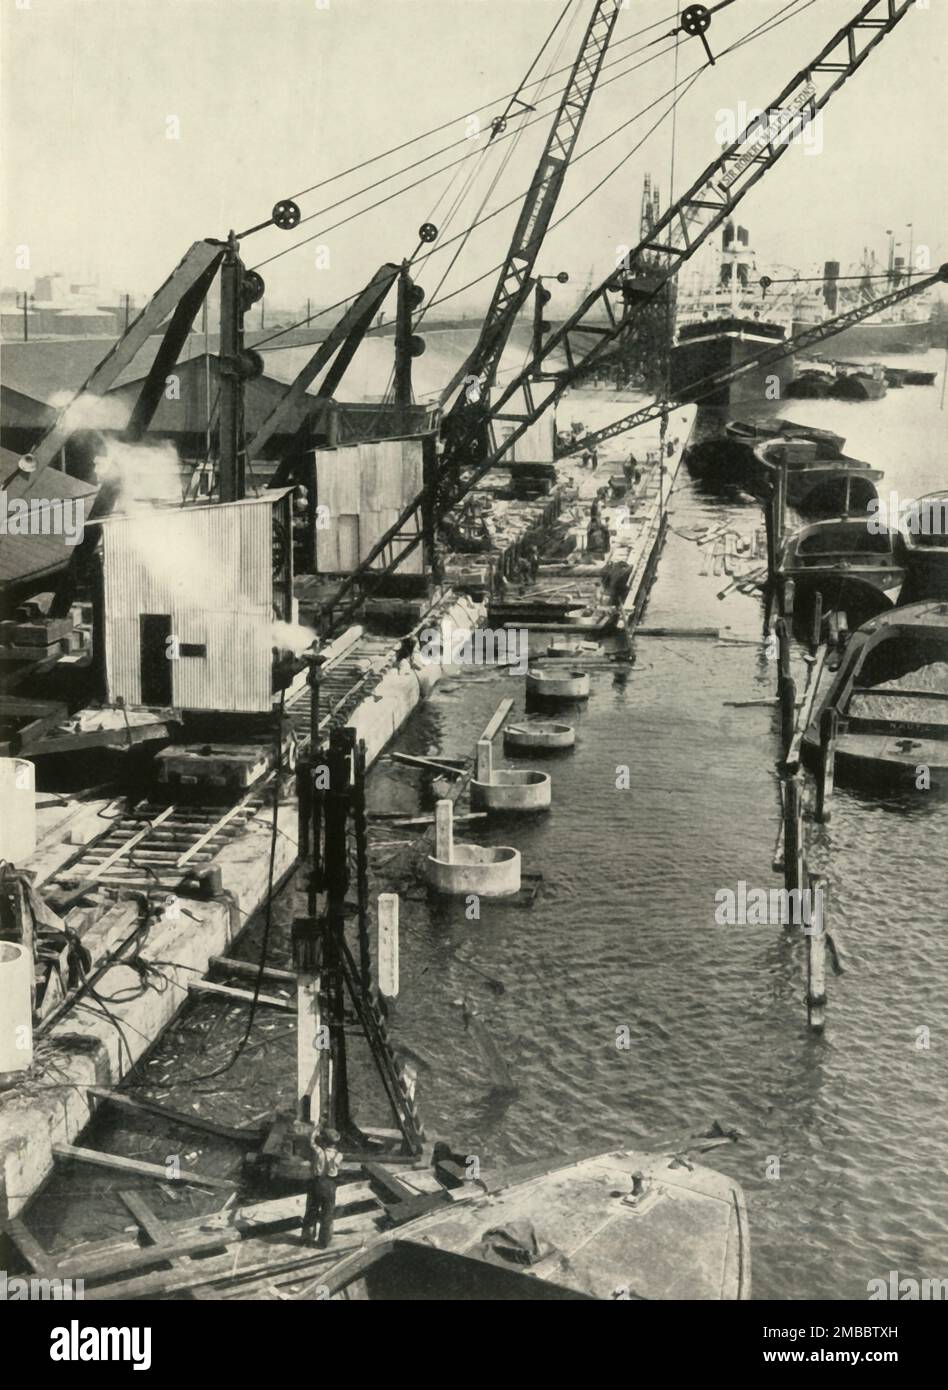 &quot;More New Quays (The Royal Albert Docks Will Obtain a Stretch Almost a Mile Long)&quot;', 1937. Cranes for unloading goods on the River Thames in London. From &quot;The Said Noble River&quot;, by Alan Bell. [The Port of London Authority, London, 1937] Stock Photo